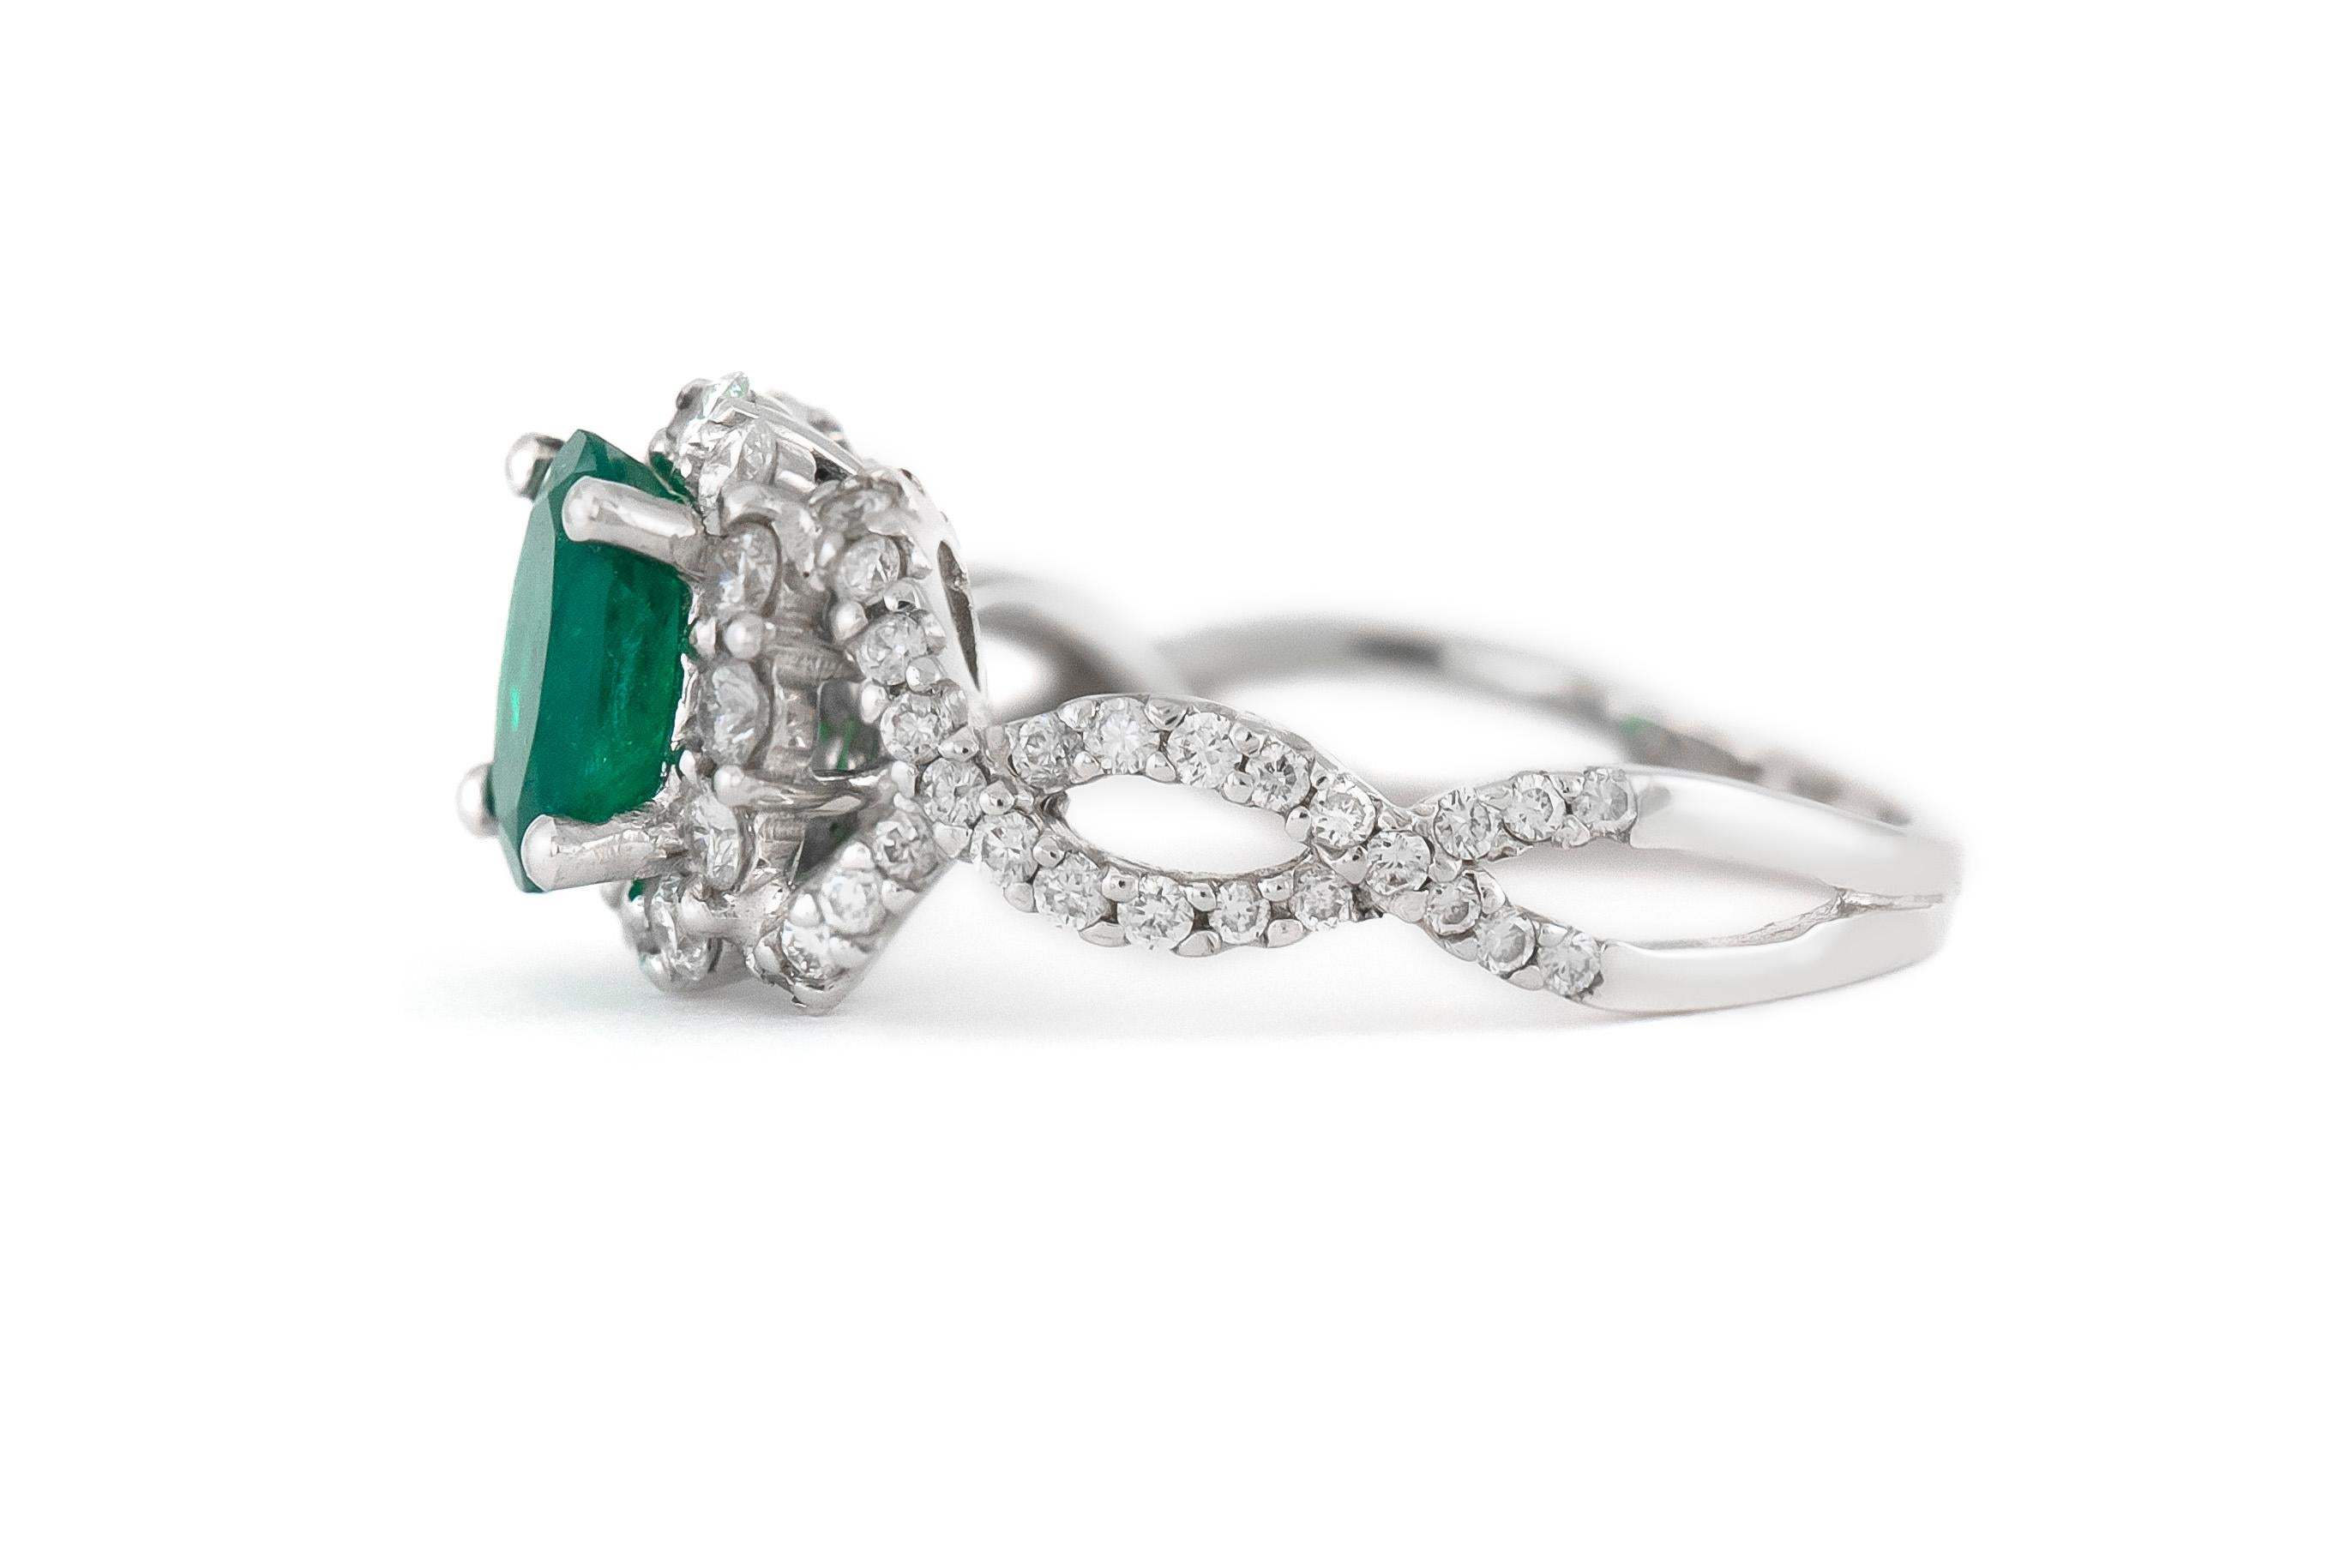 The ring is finely crafed in 18k white gold with center beautiful emerald weighing approximately total of 1.07 carat and diamonds weighing approximately total of 0.80 carat.
Circa 1950.